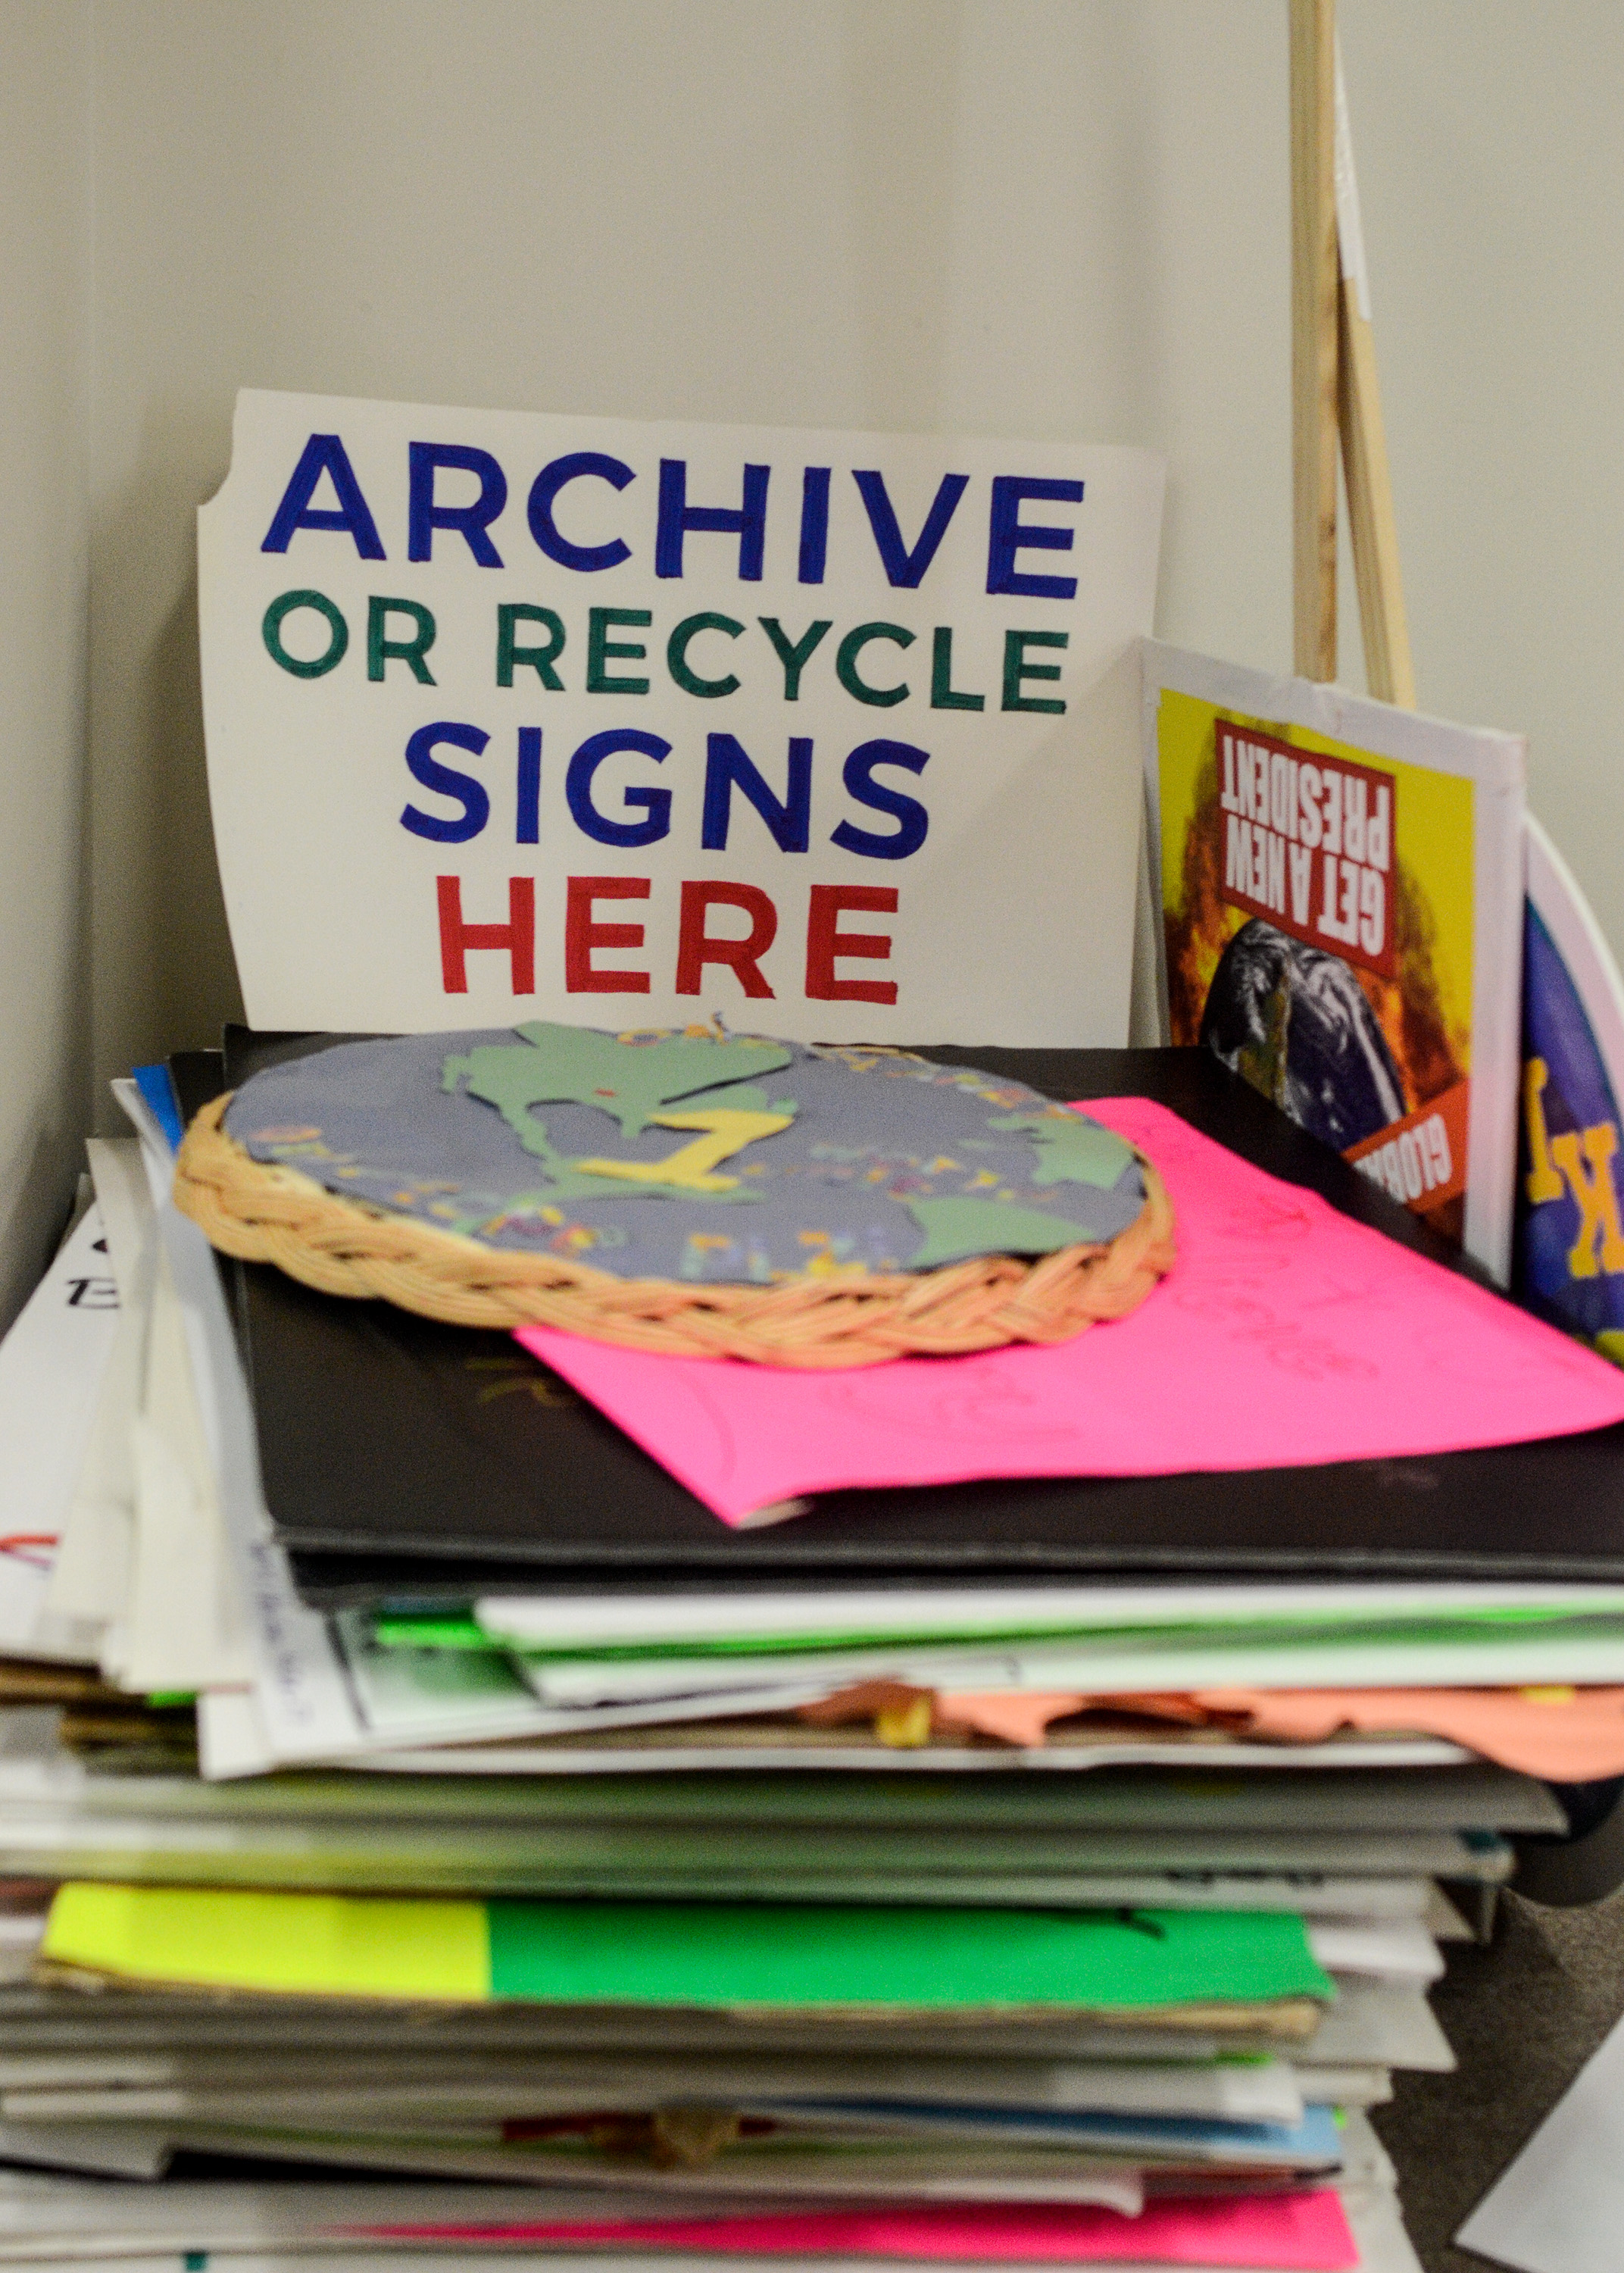 Image: A stack of multicolored poster board signs is shown. A sign that reads "Archive or Recycle Signs Here" stands above the stack. One sign is the map of the world pasted onto a woven basket. Two signs with sticks attached can be seen to the right. Image by William Camargo. 